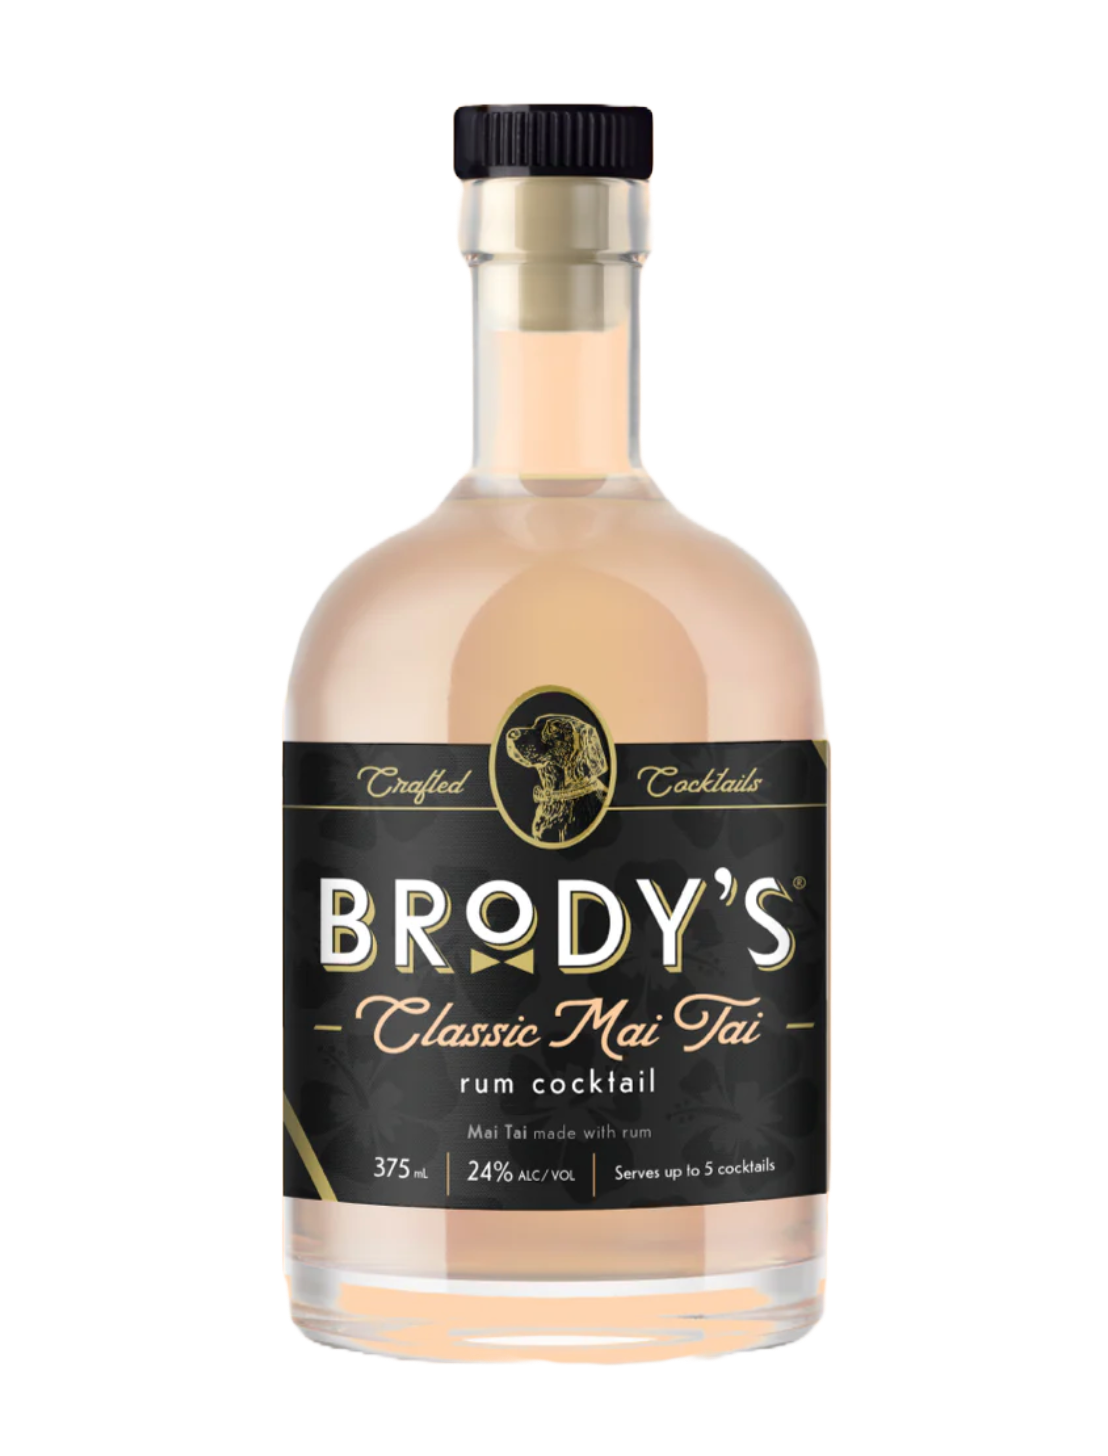 A bottle of Brody's Classic Mai Tai - Rum Cocktail in front of a plain white background